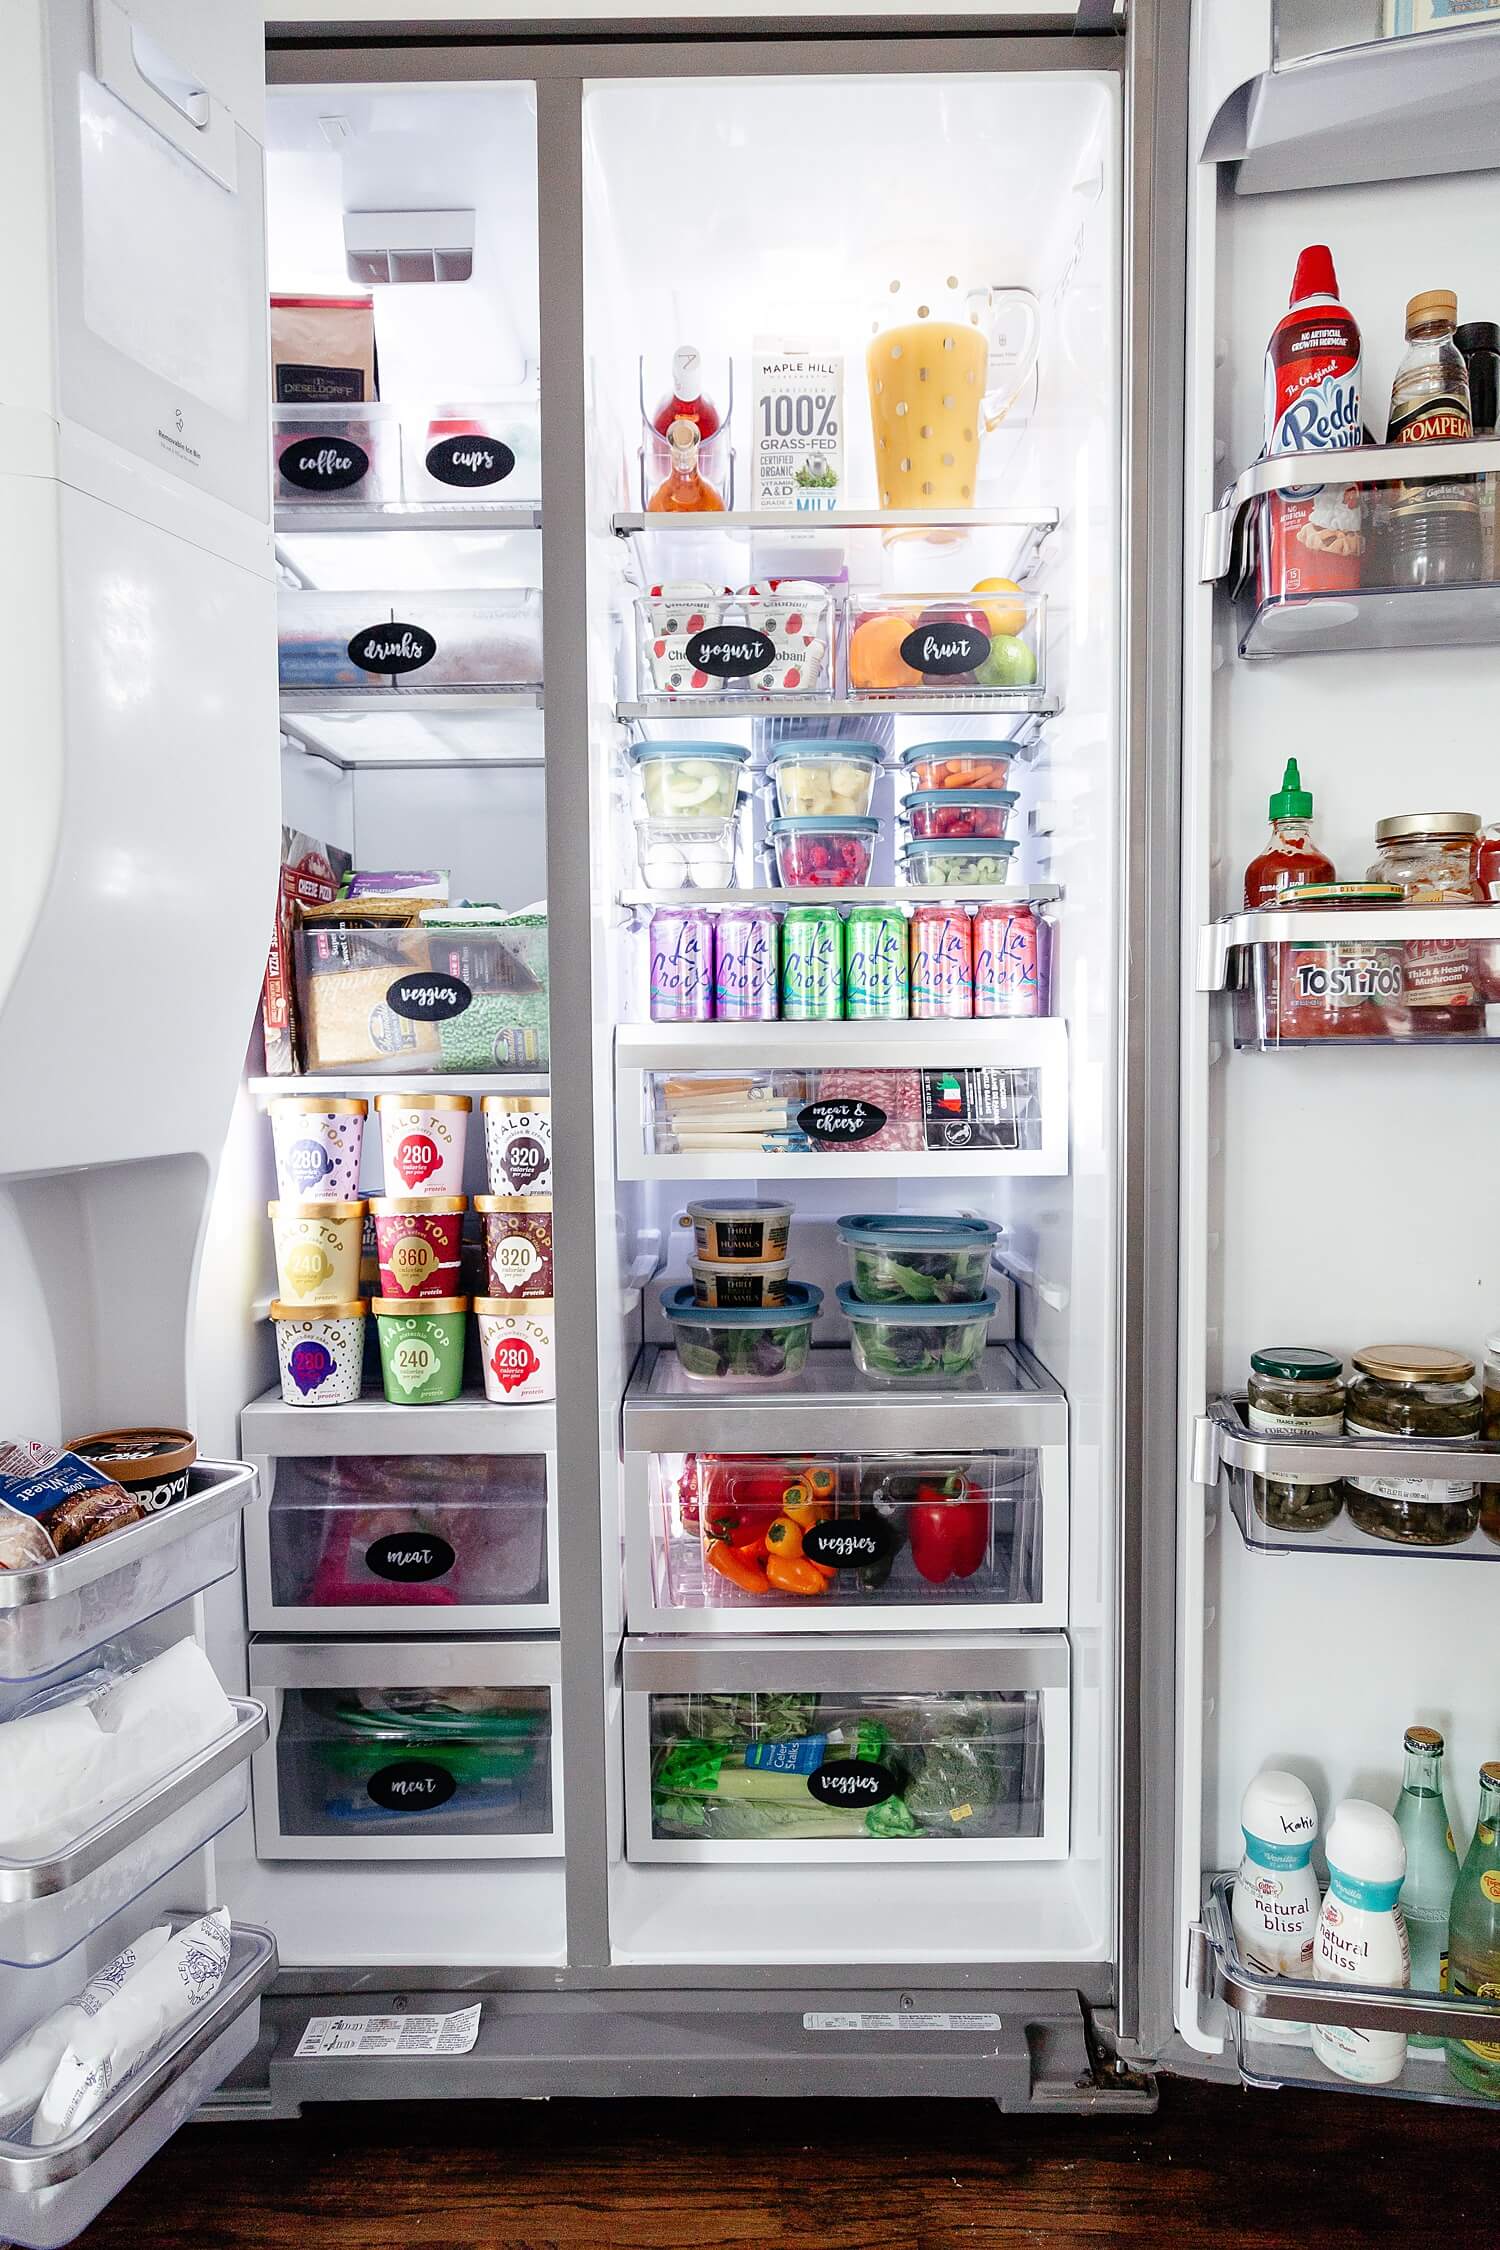 The Best Way to Organize Your Fridge (and How to Keep It Organized)